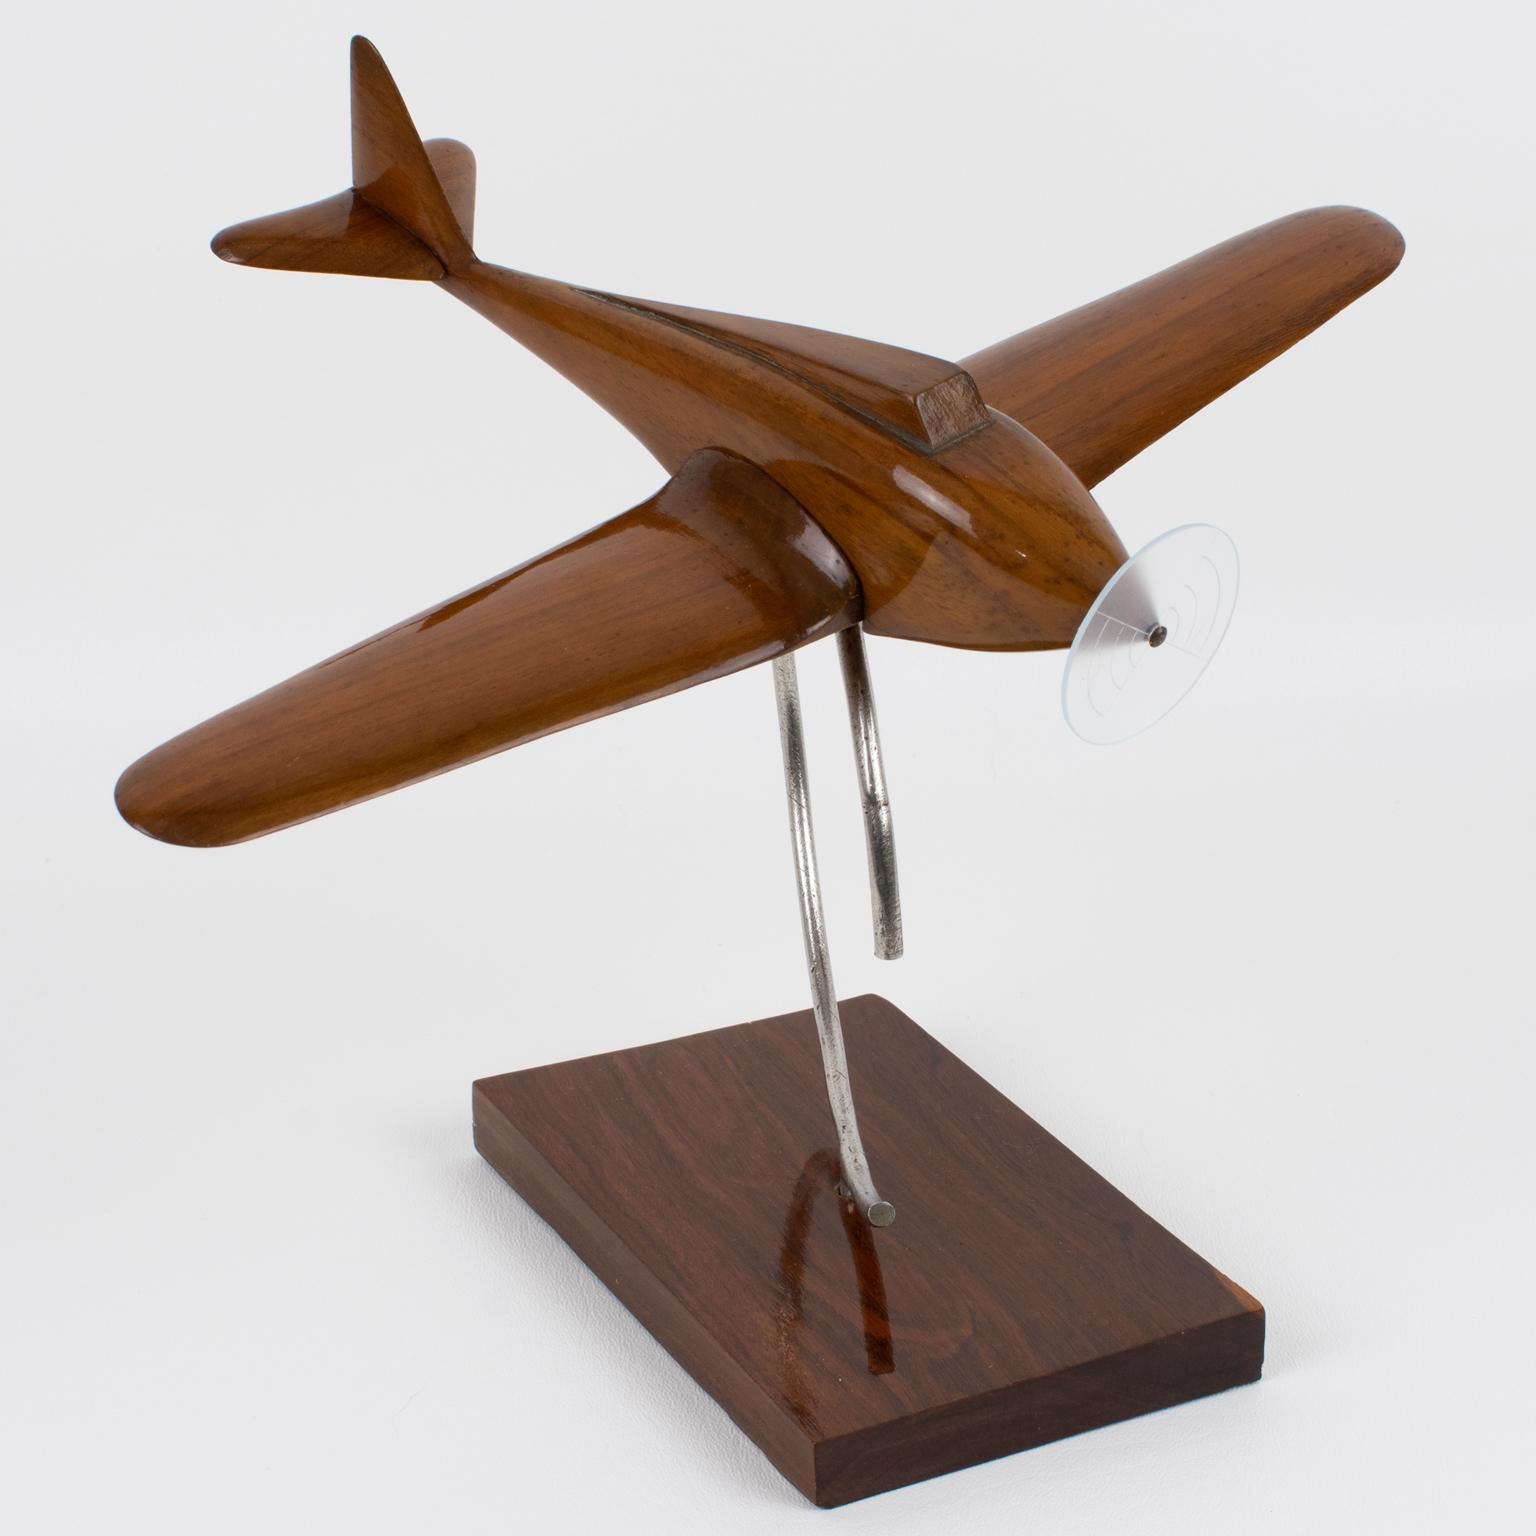 Art Deco Wood and Metal Airplane Aviation Propeller Model, France 1930s For Sale 1